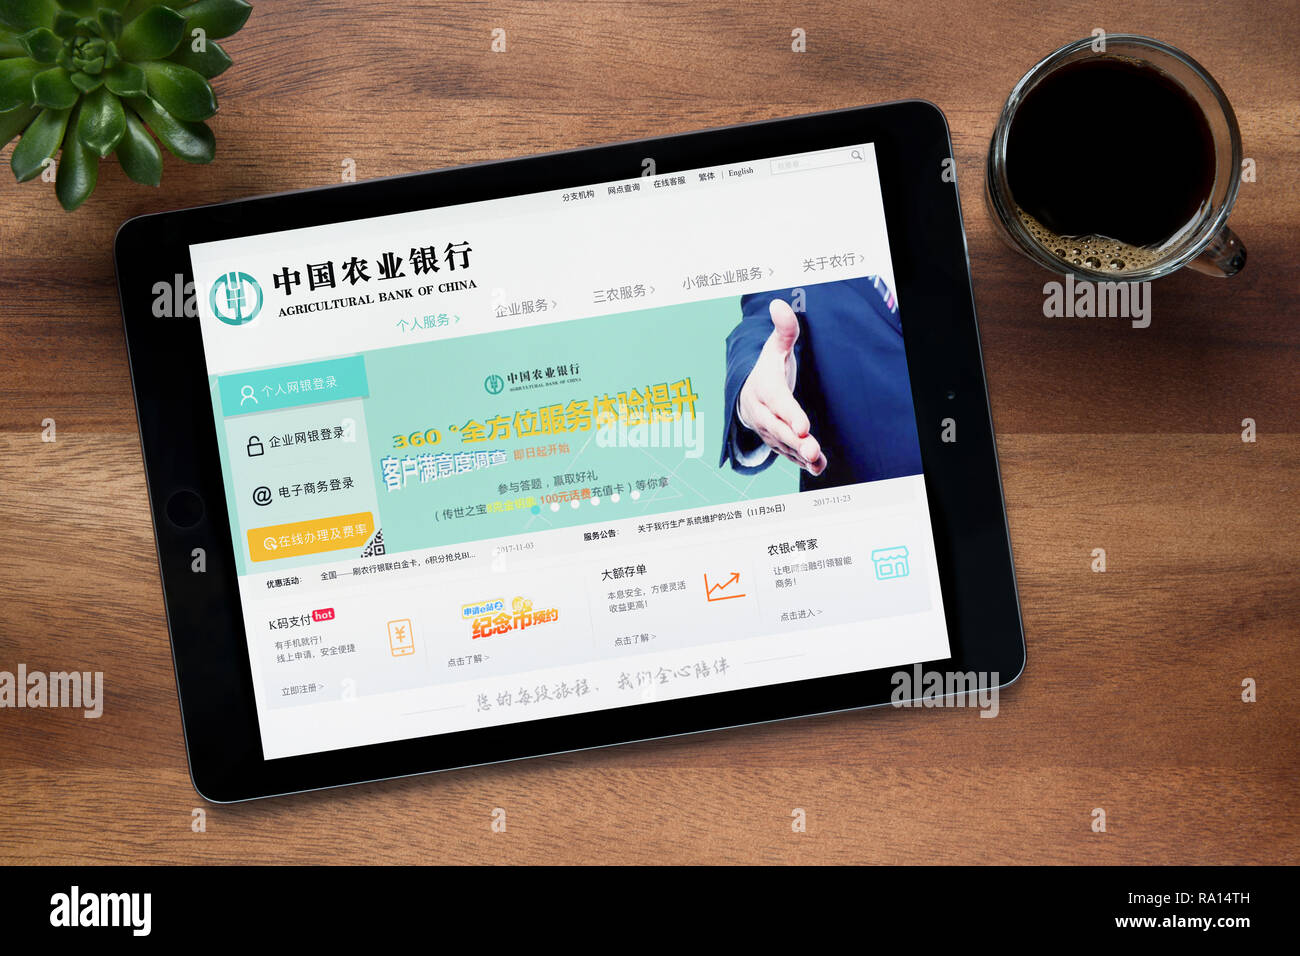 The website of Agricultural Bank of China is seen on an iPad tablet, on a wooden table along with an espresso coffee and house plant (Editorial only). Stock Photo